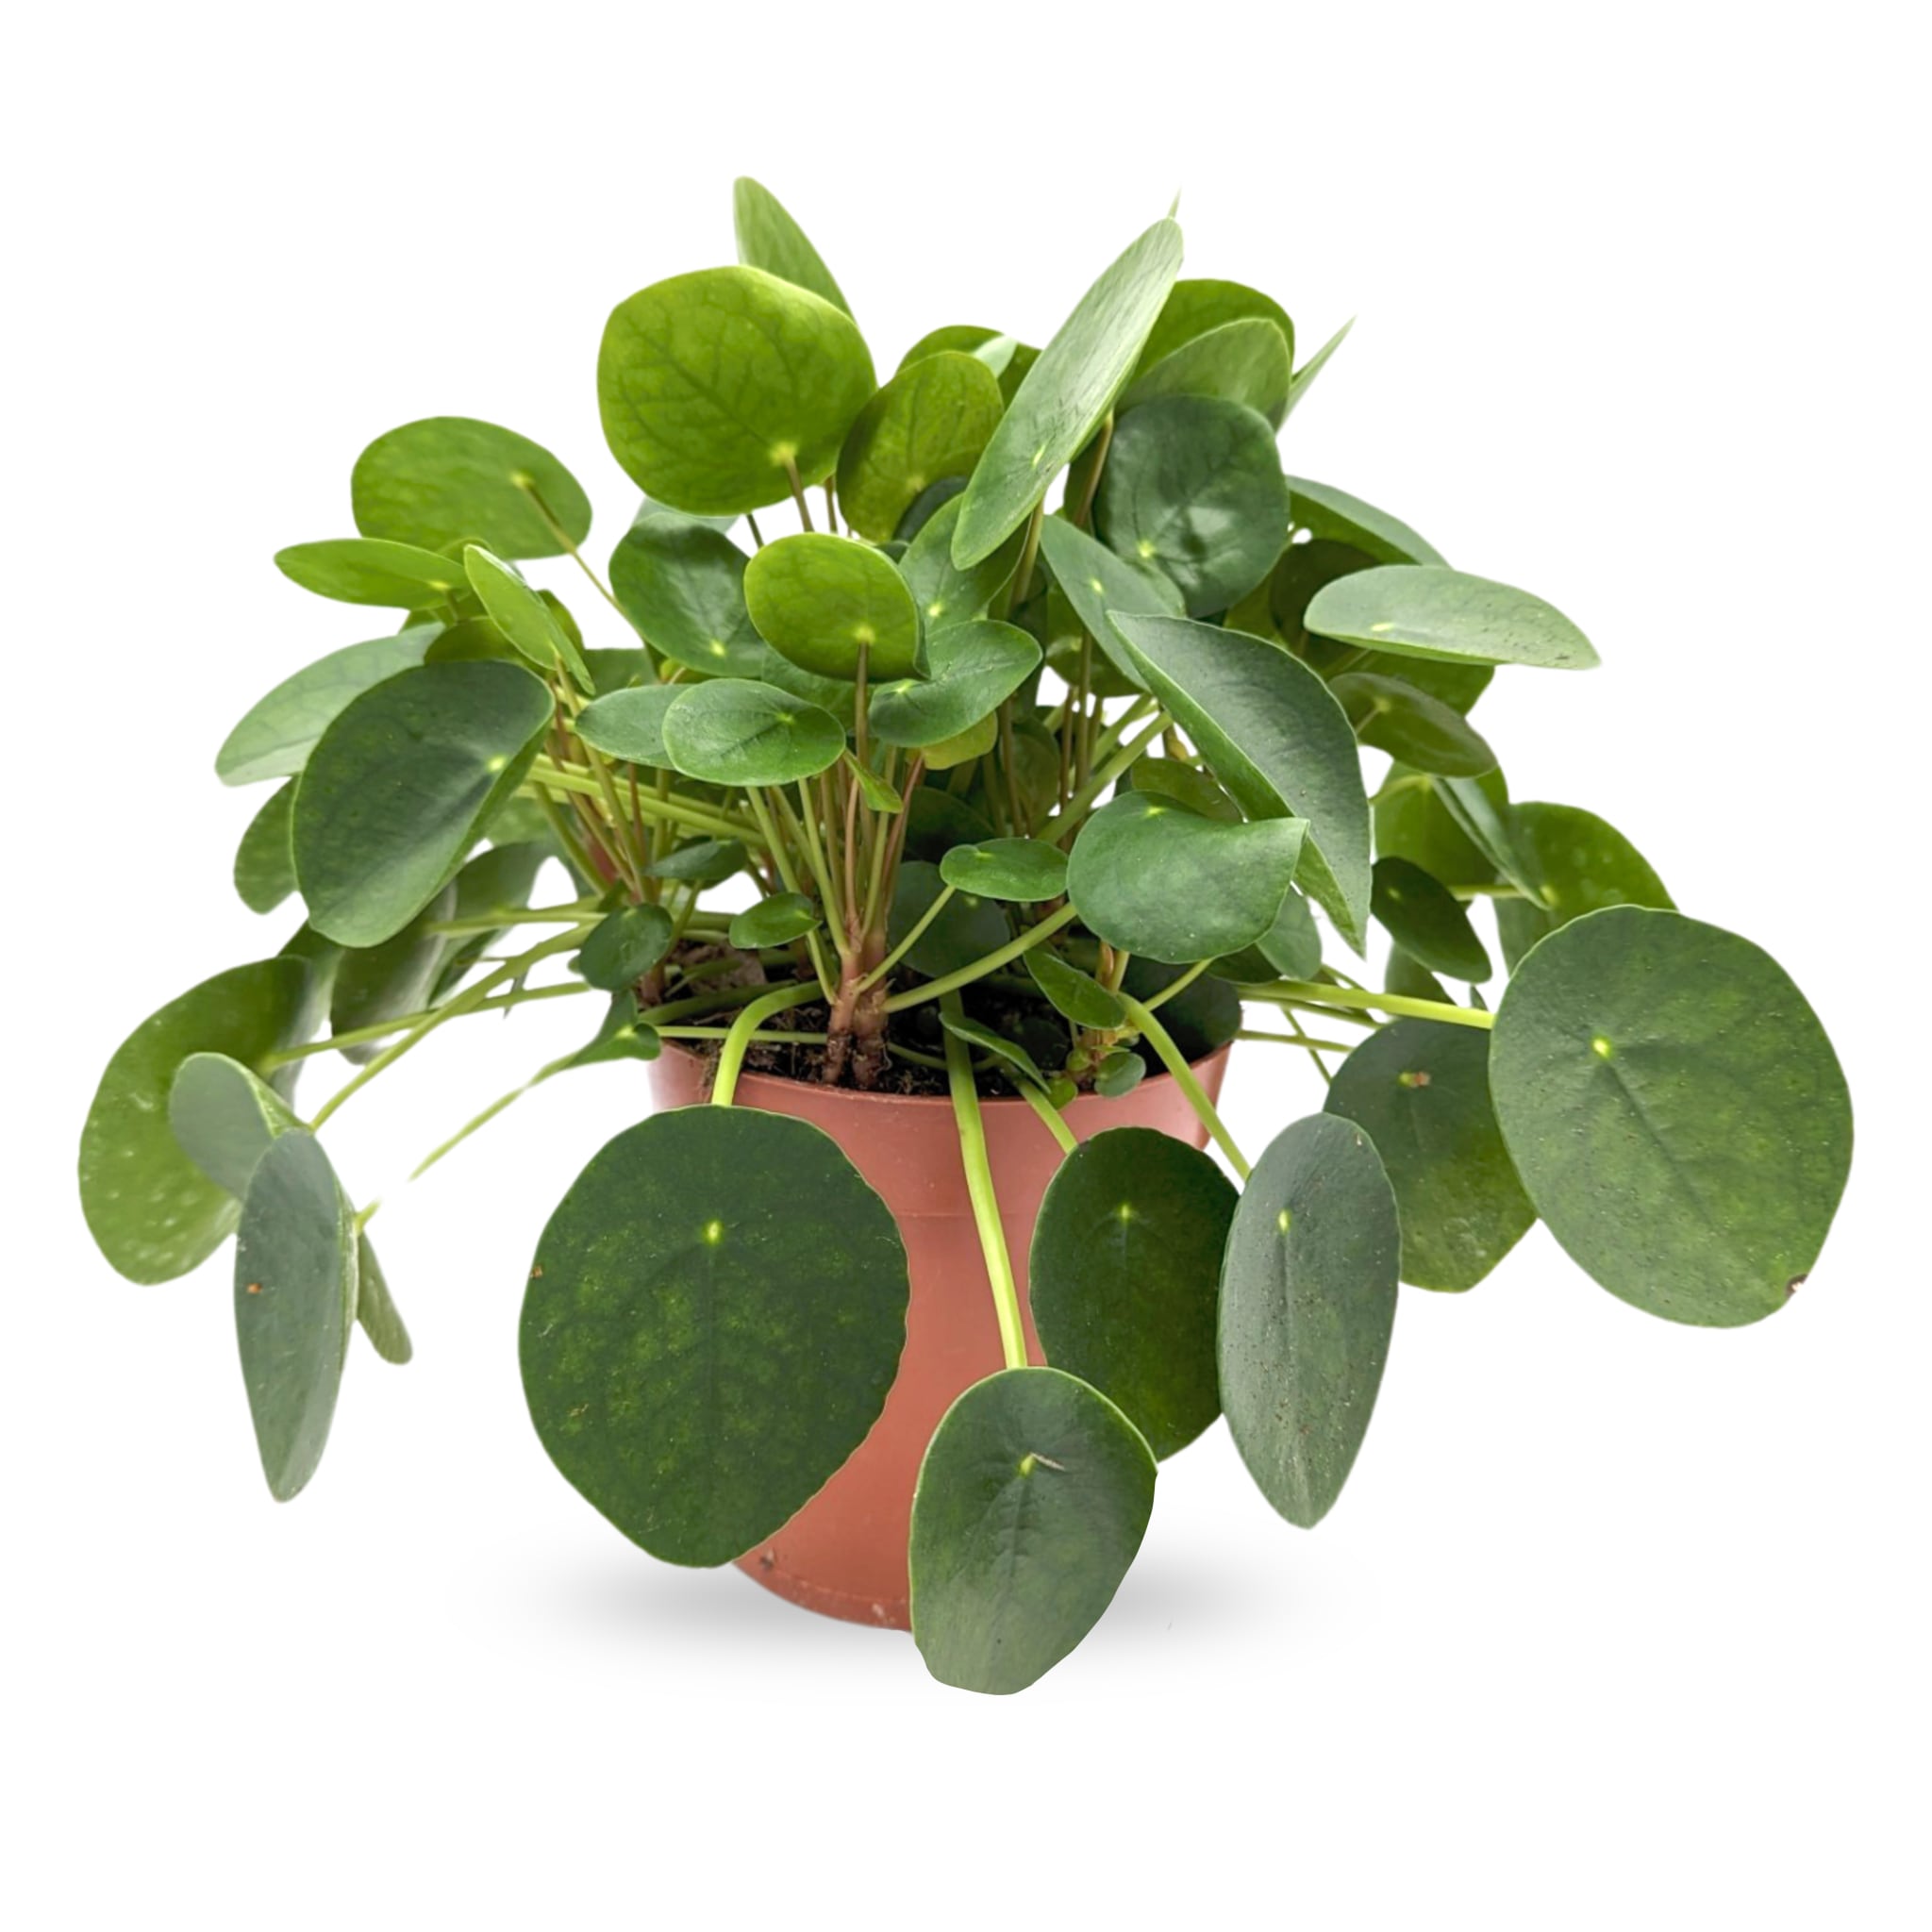 The Best Thing About Pilea peperomiodes